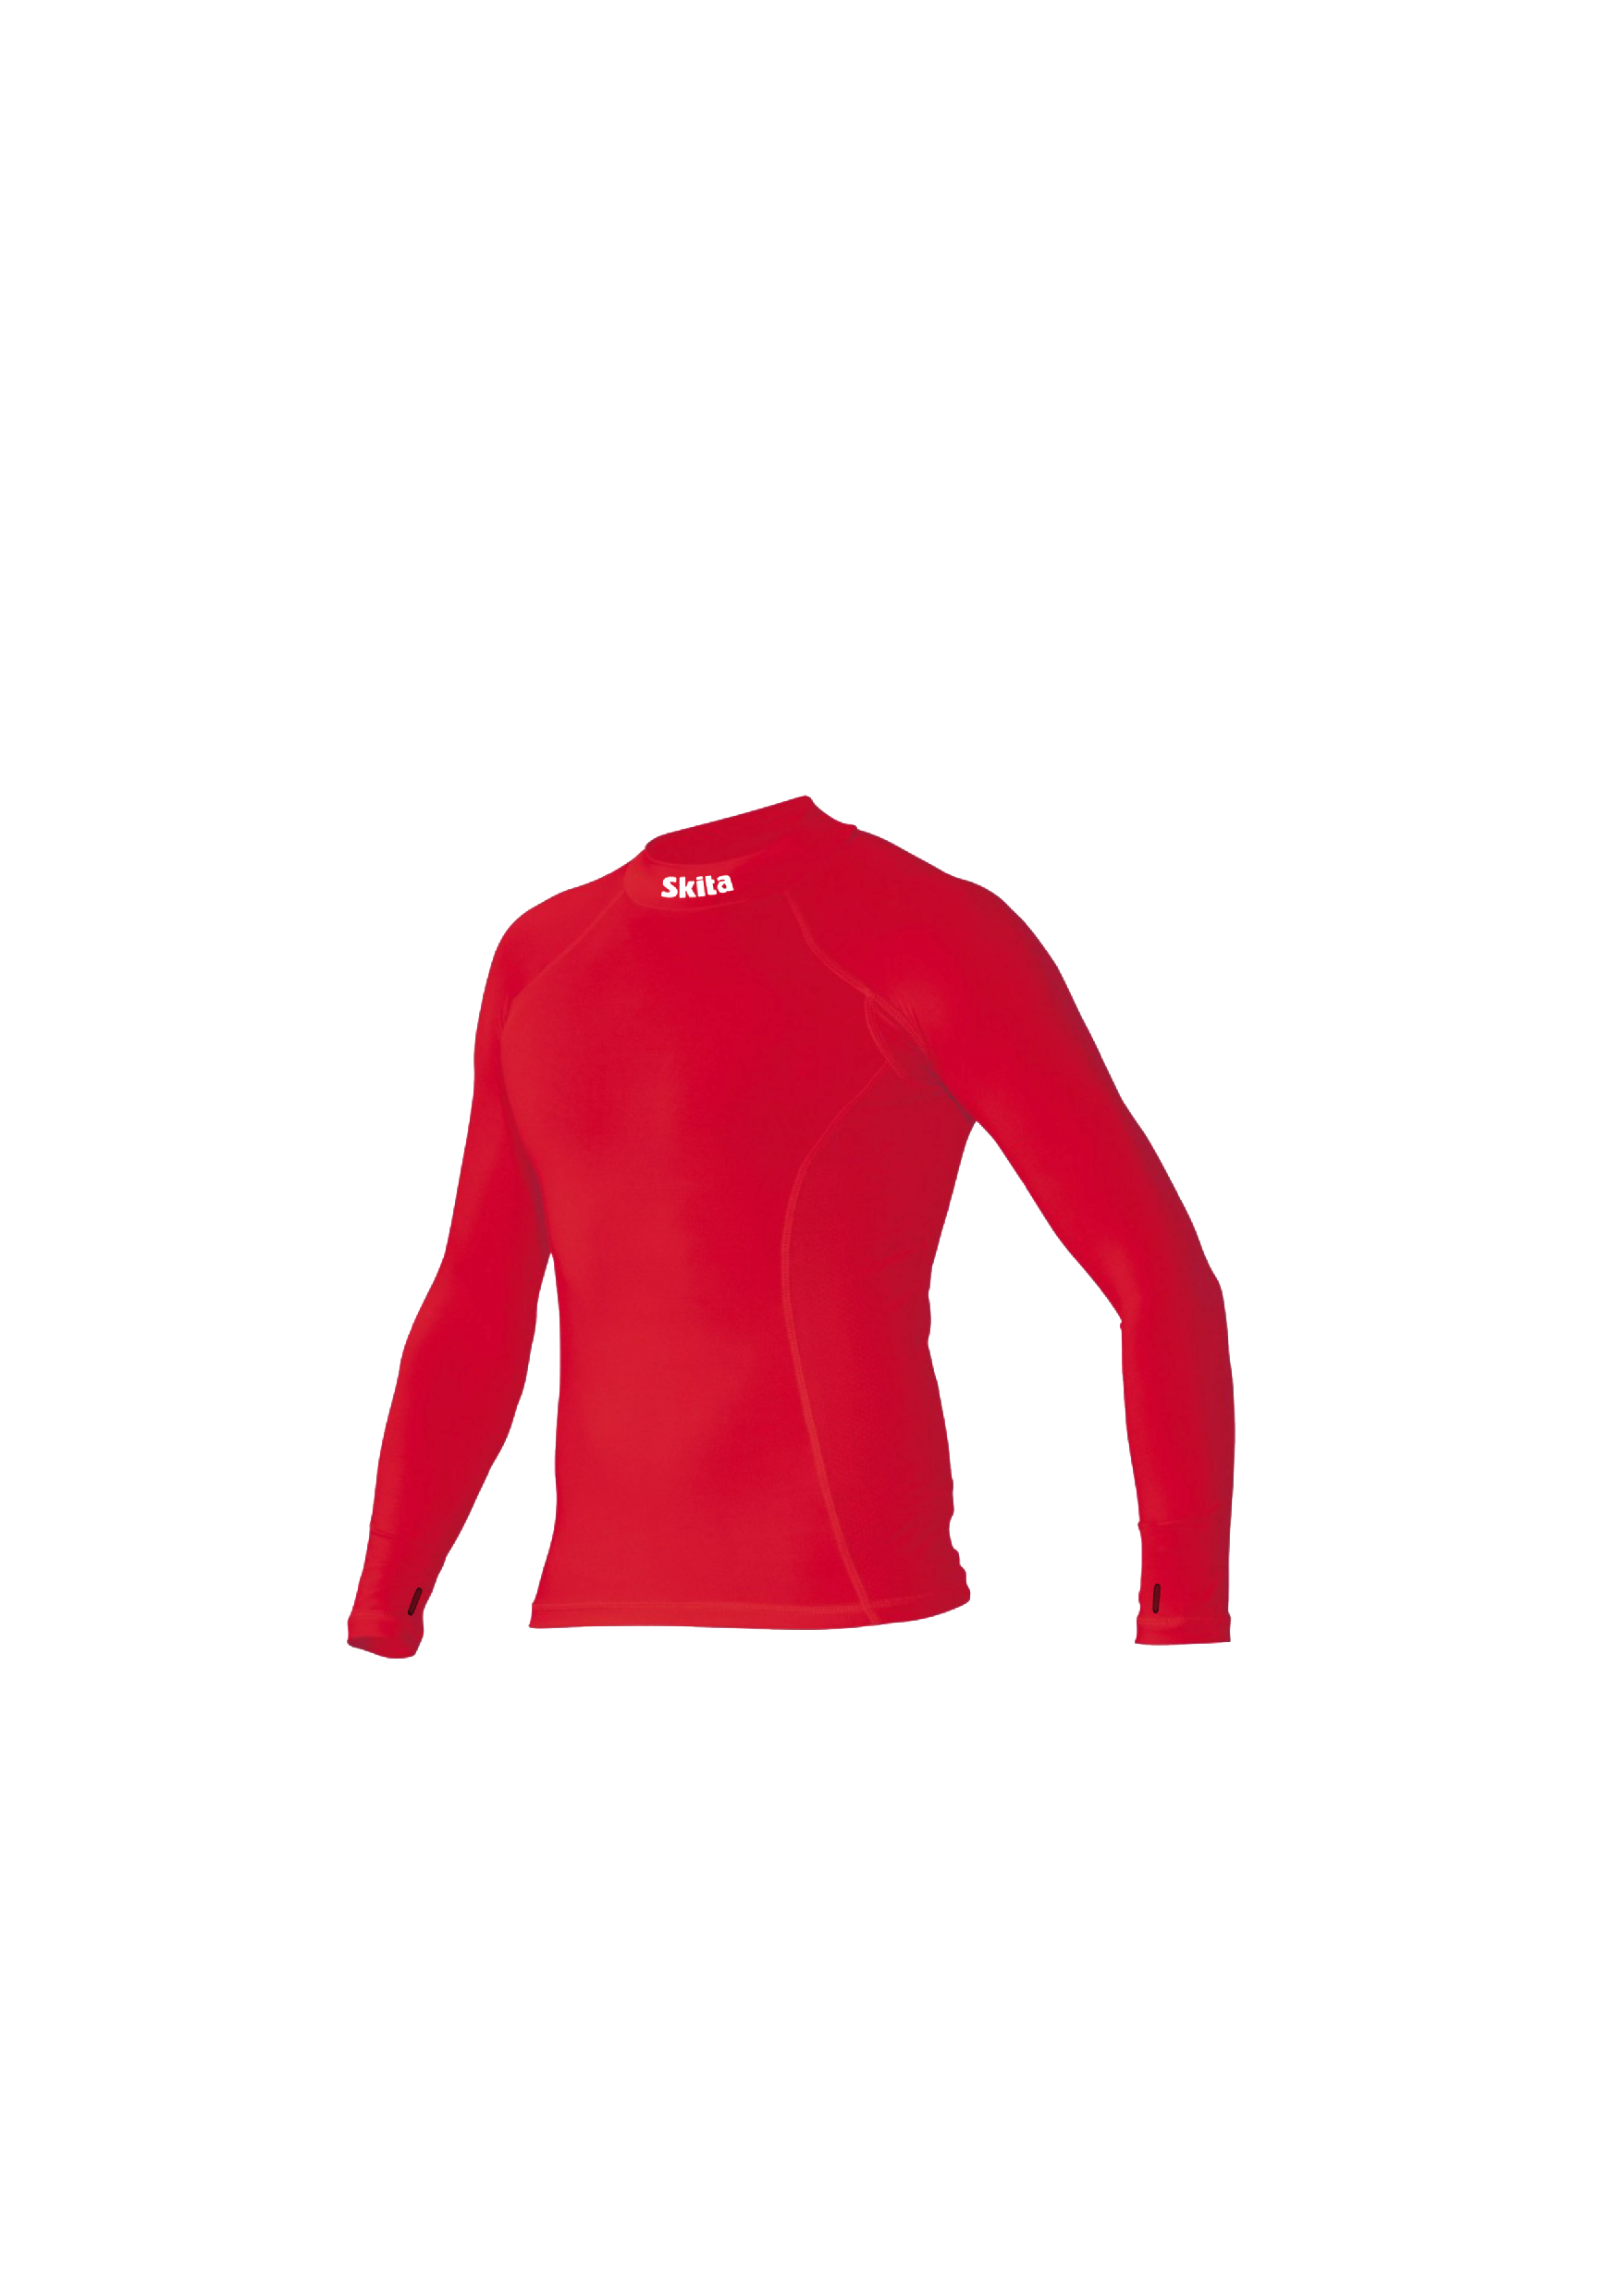 Sous-maillot SKITA Pro rouge